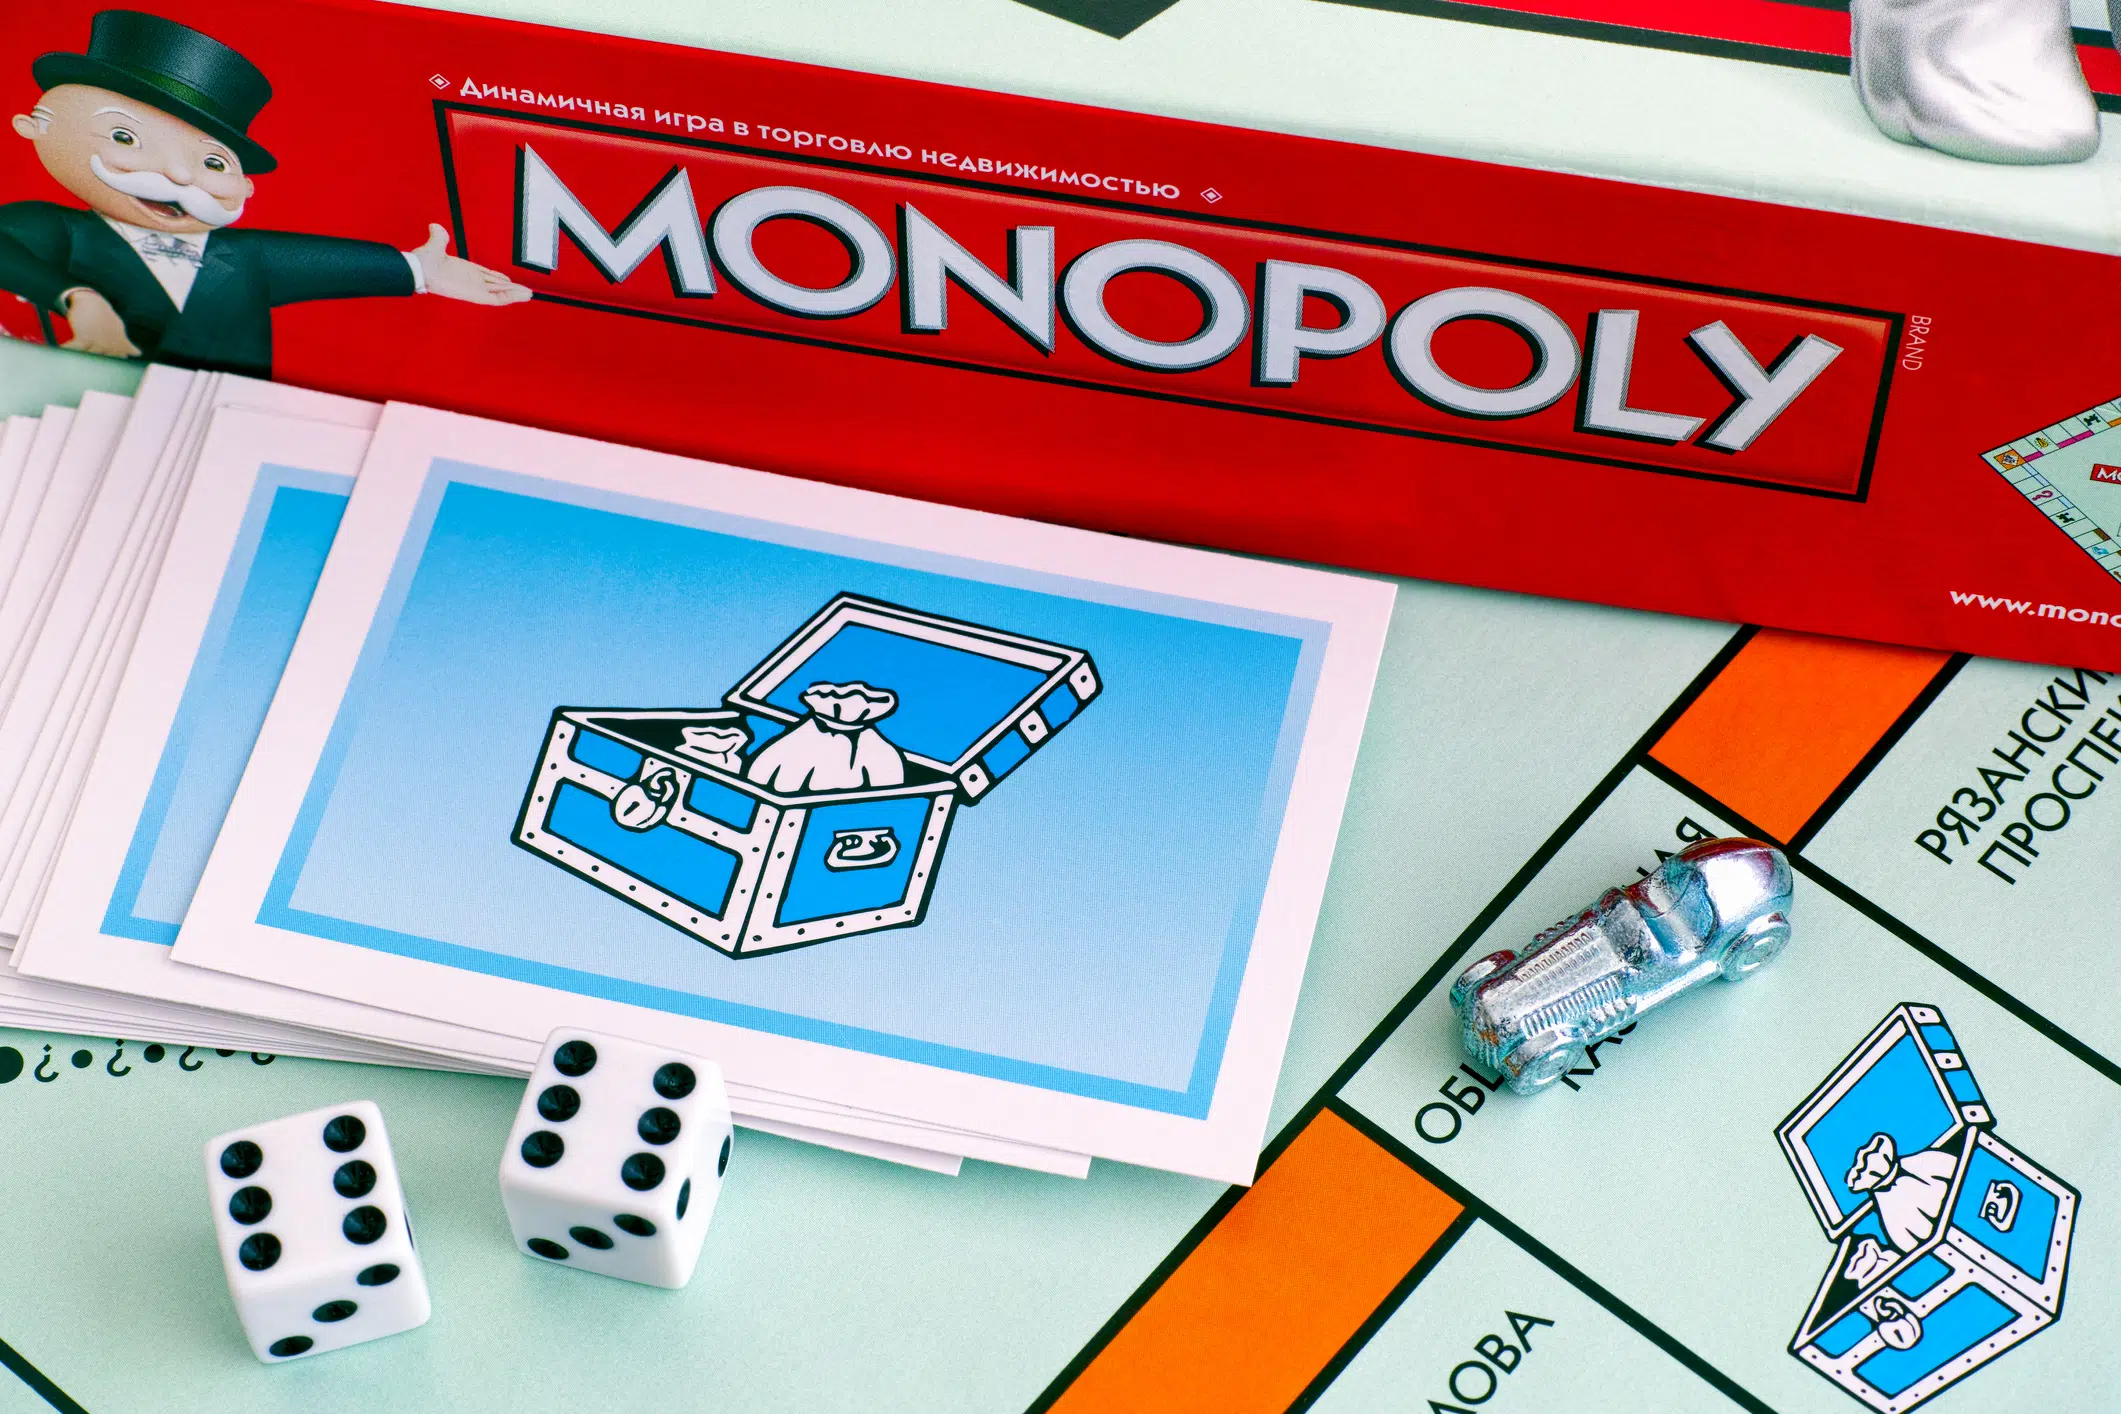 Monopoly is getting new Community Chest cards and you can decide what they are